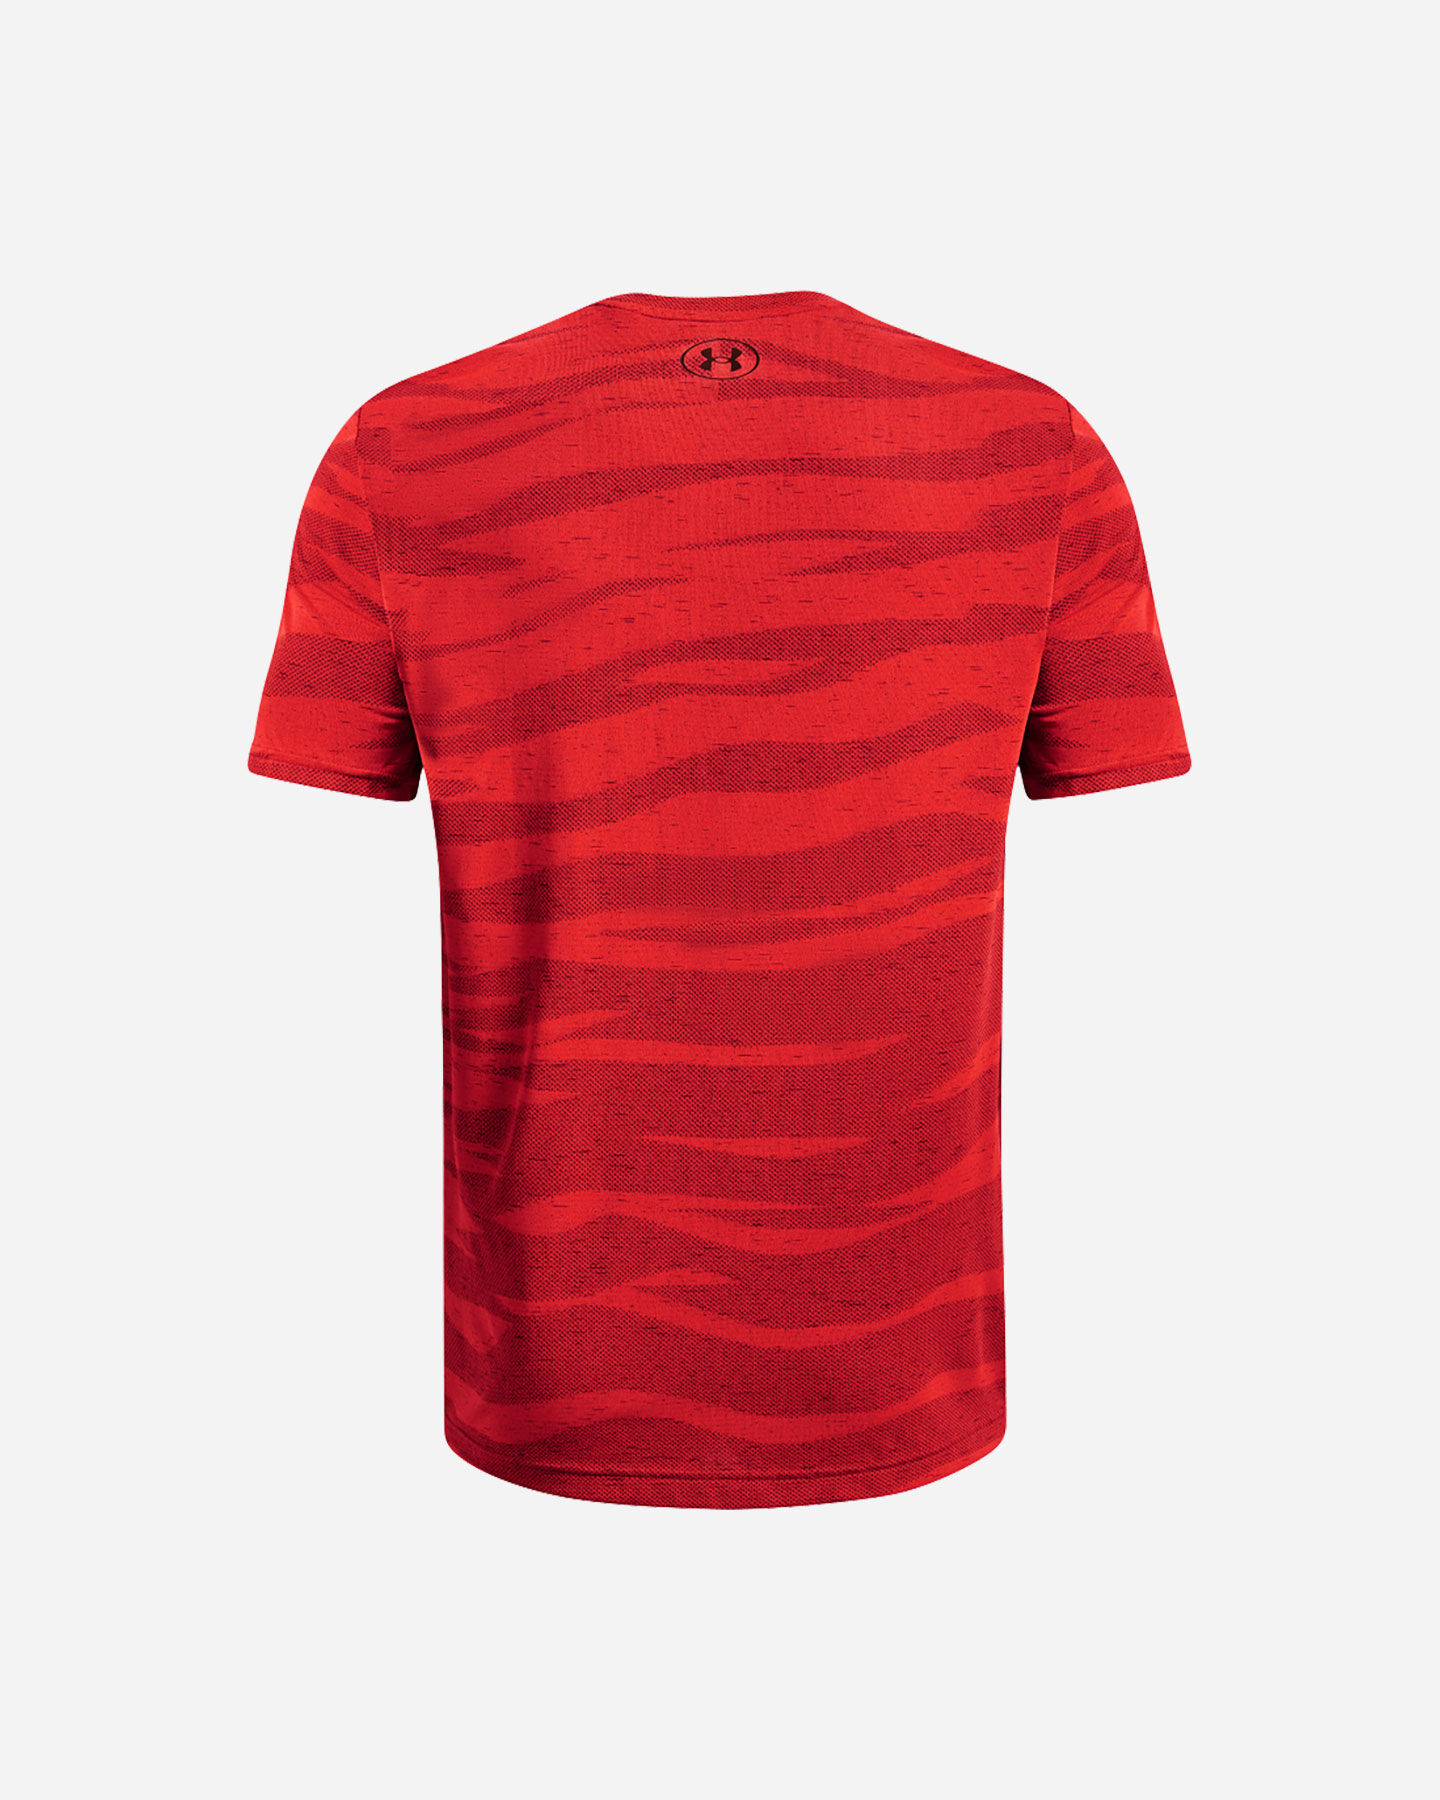  T-Shirt training UNDER ARMOUR SEAMLESS WAVE M S5459215|0810|SM scatto 1